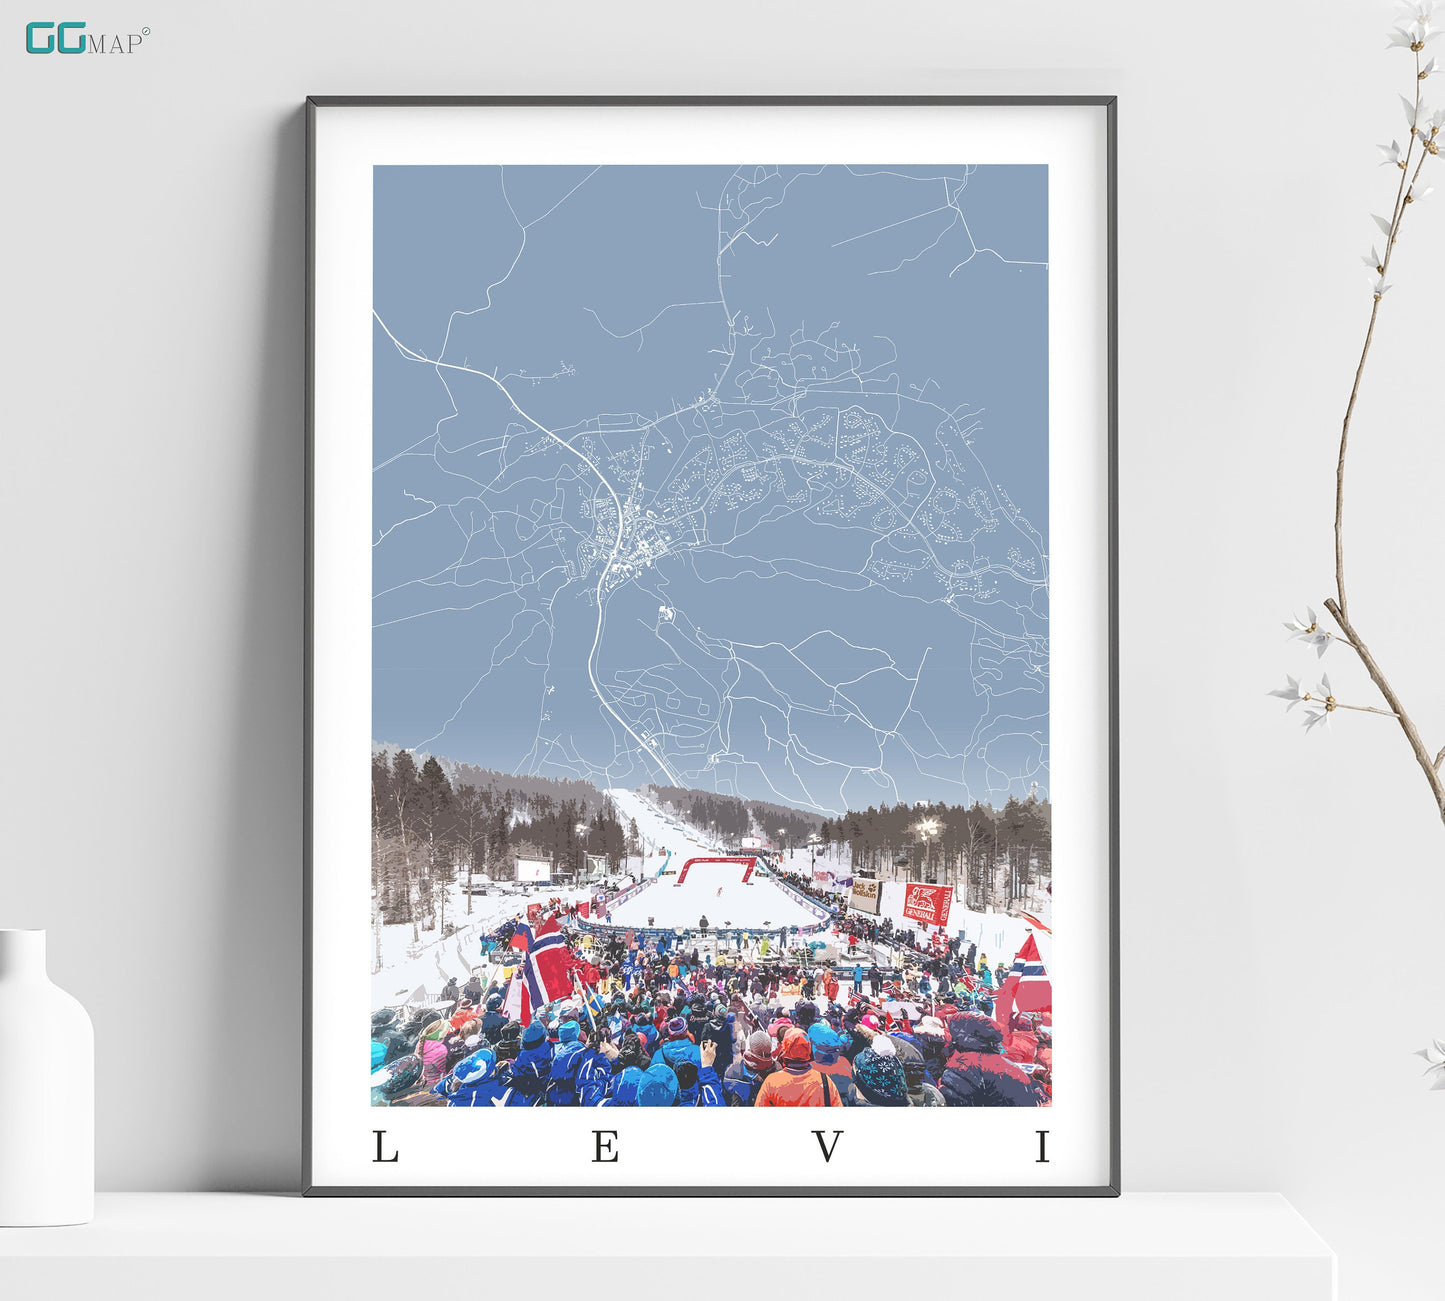 City map of LEVI - Levi skiing - Home Decor Levi skiing adventure - Levi gift - World cup skiing - Skiing poster - Finland poster Skiing